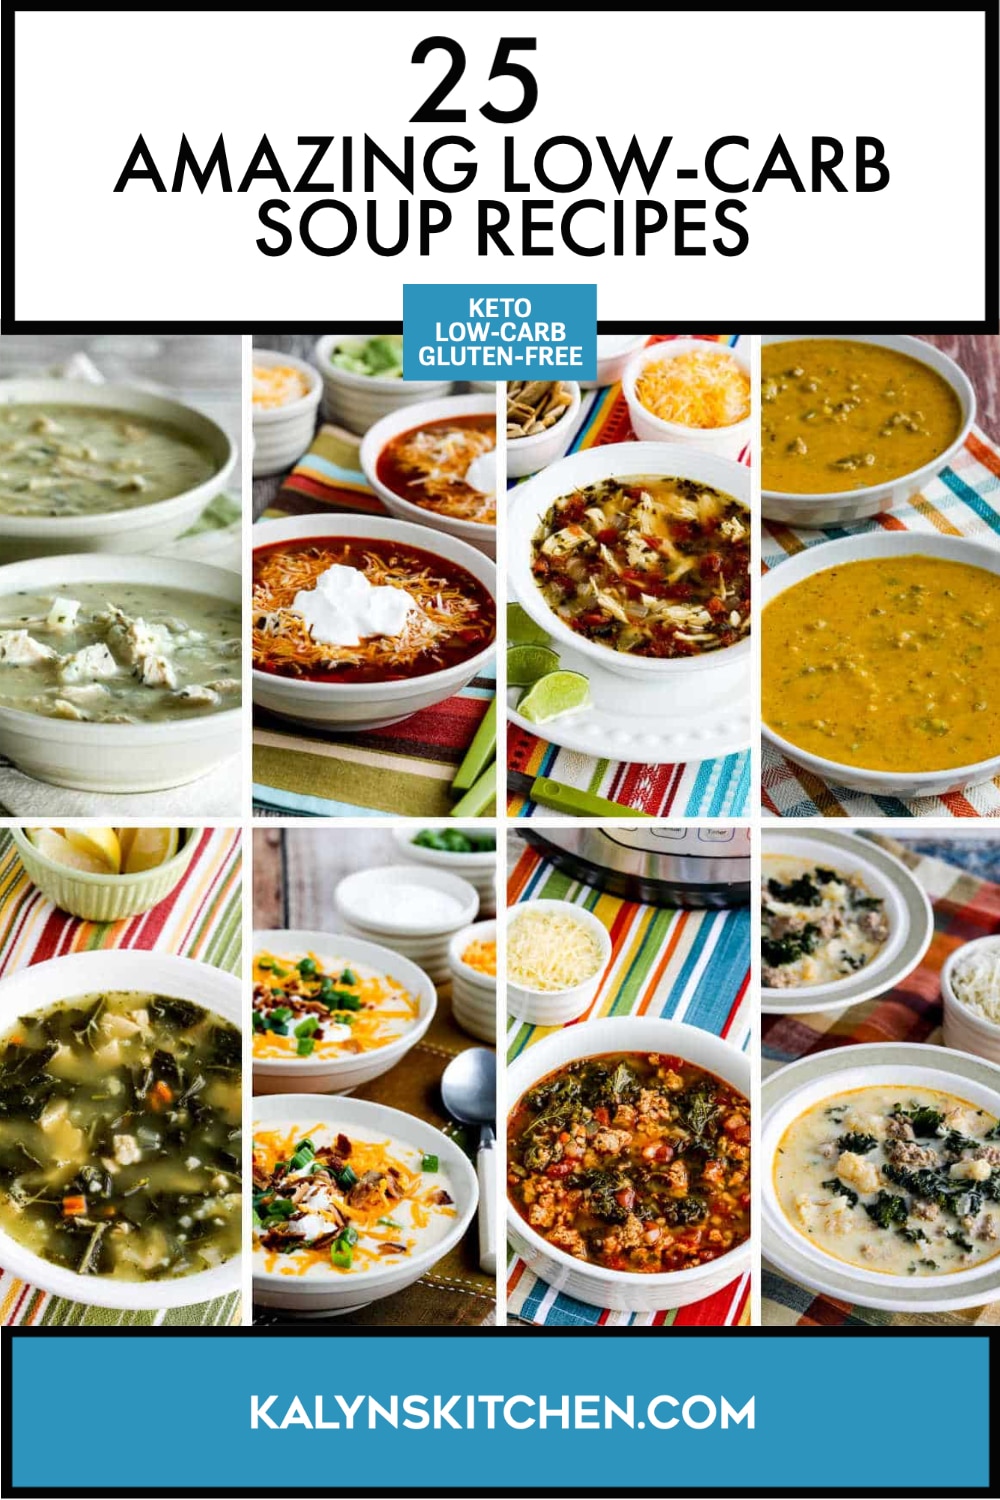 Pinterest image of 25 Amazing Low-Carb Soup Recipes